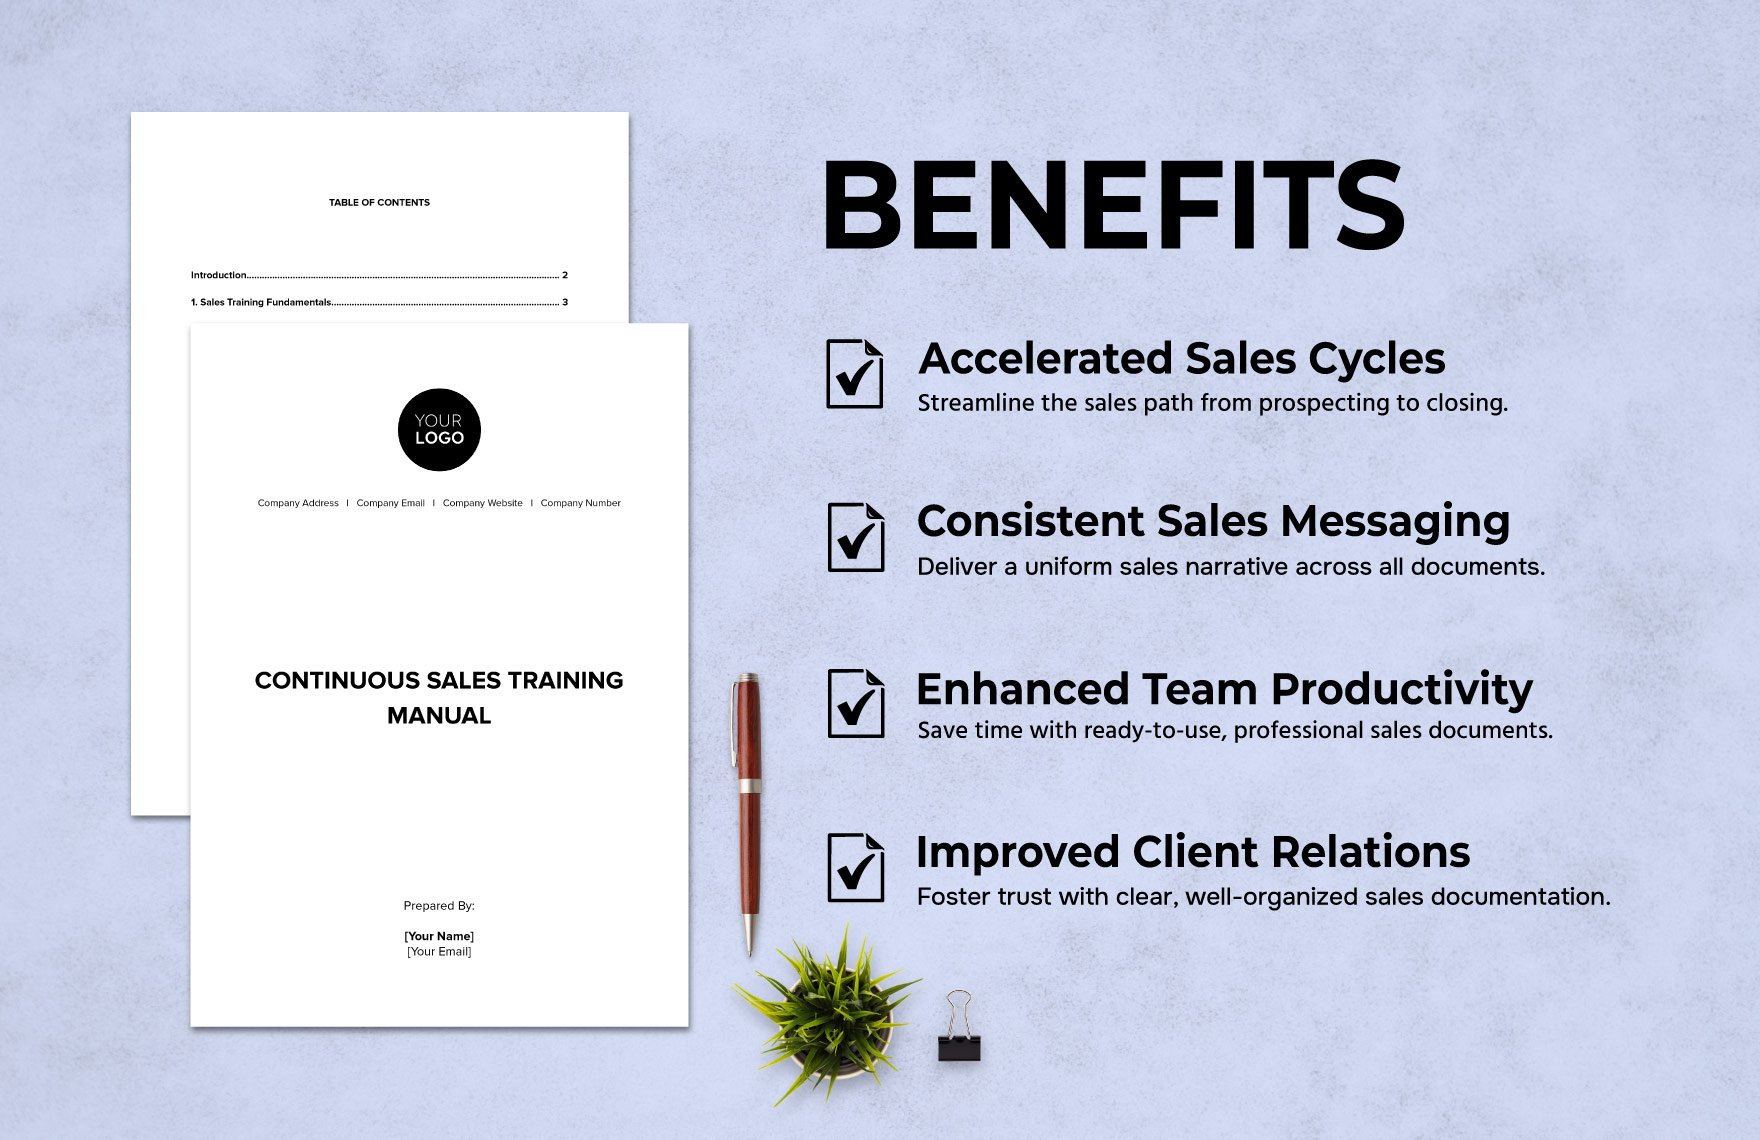 Continuous Sales Training Manual Template